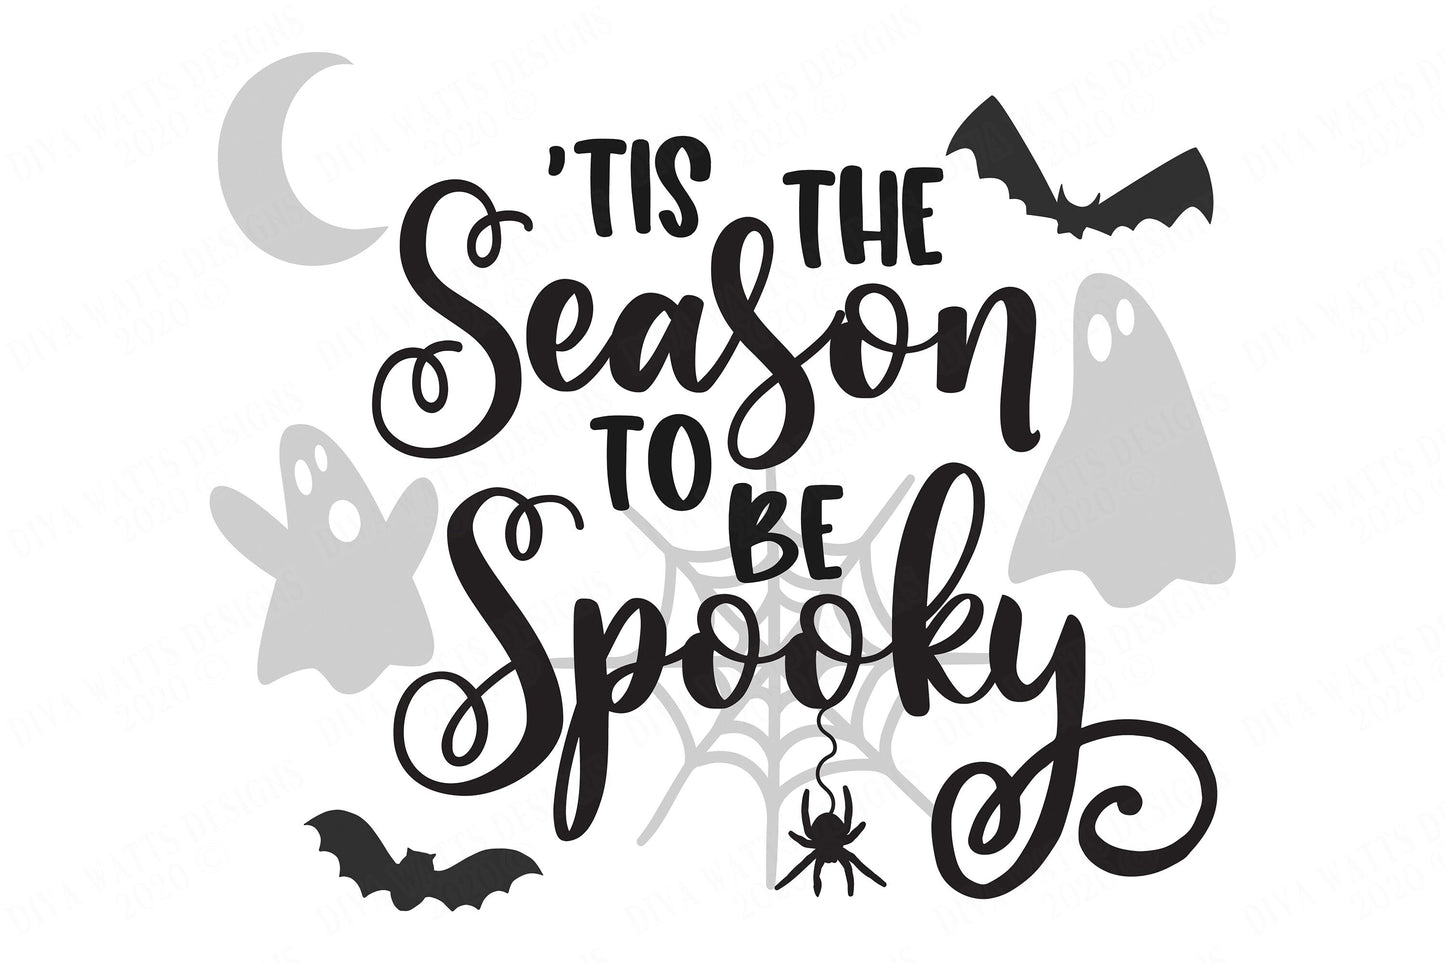 Tis The Season To Be Spooky | Halloween | Fall Autumn | Cutting File and Printable | SVG DXF JPG and More!